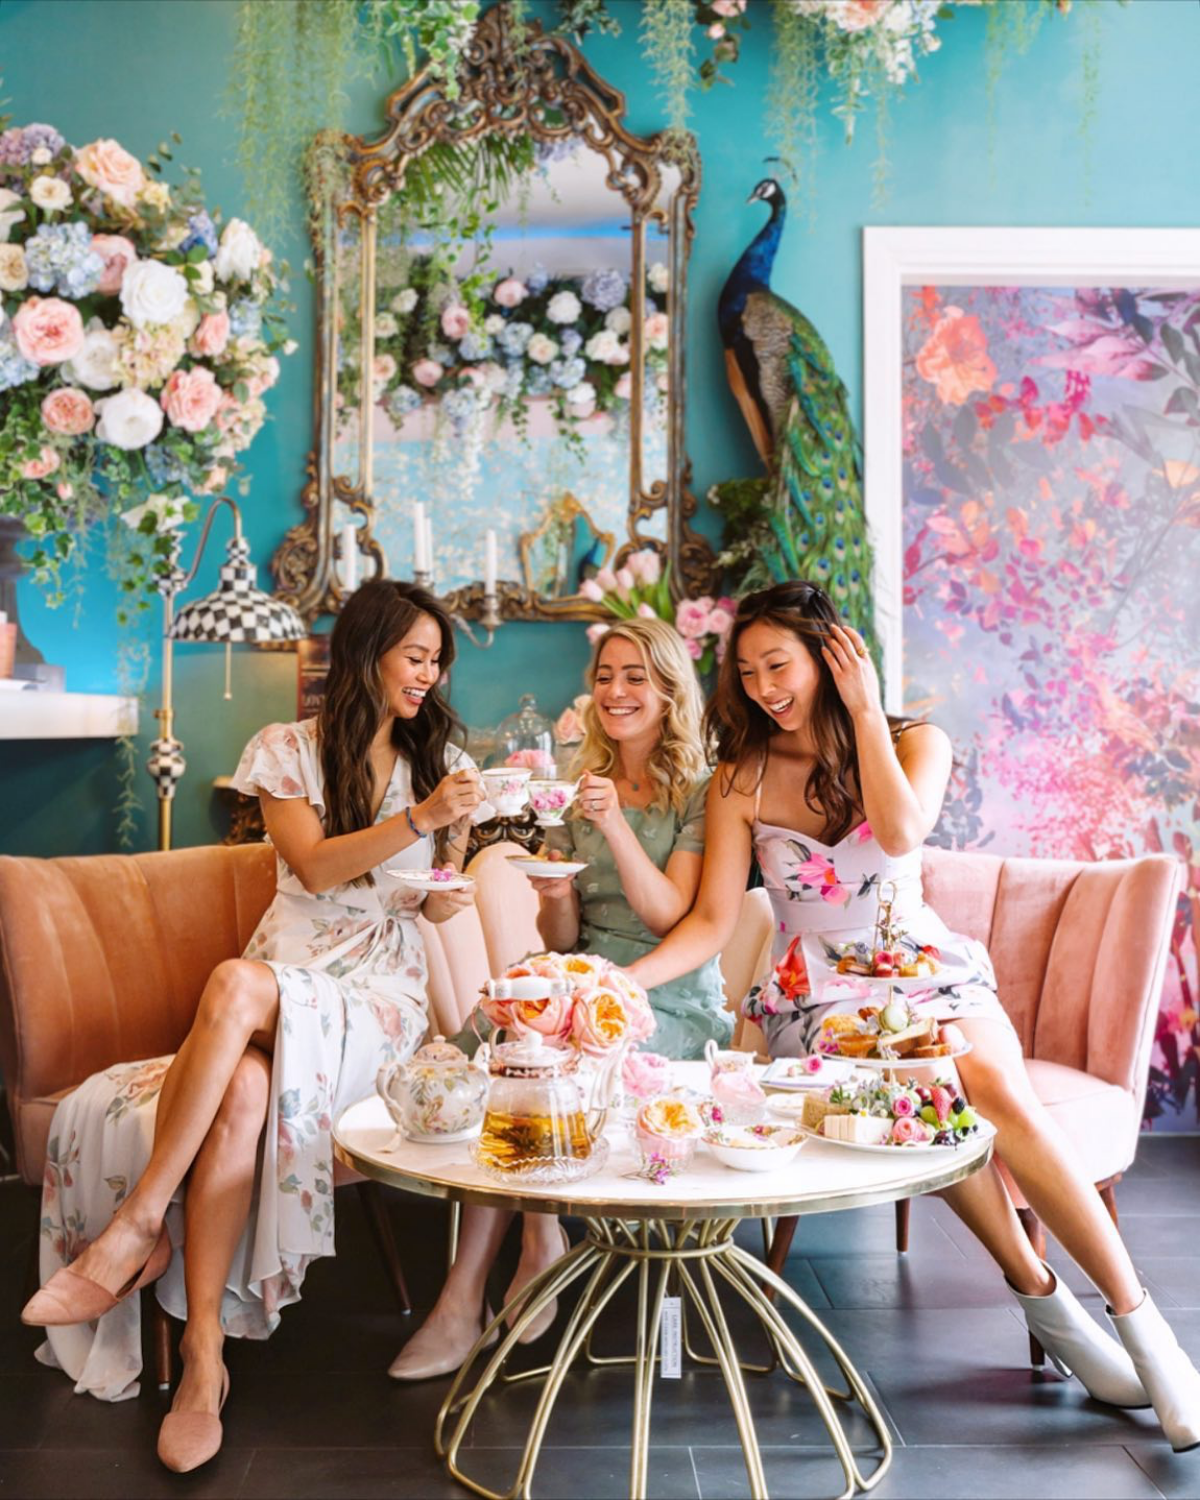 How To Plan The Perfect Adult Tea Party: A Simple Guide